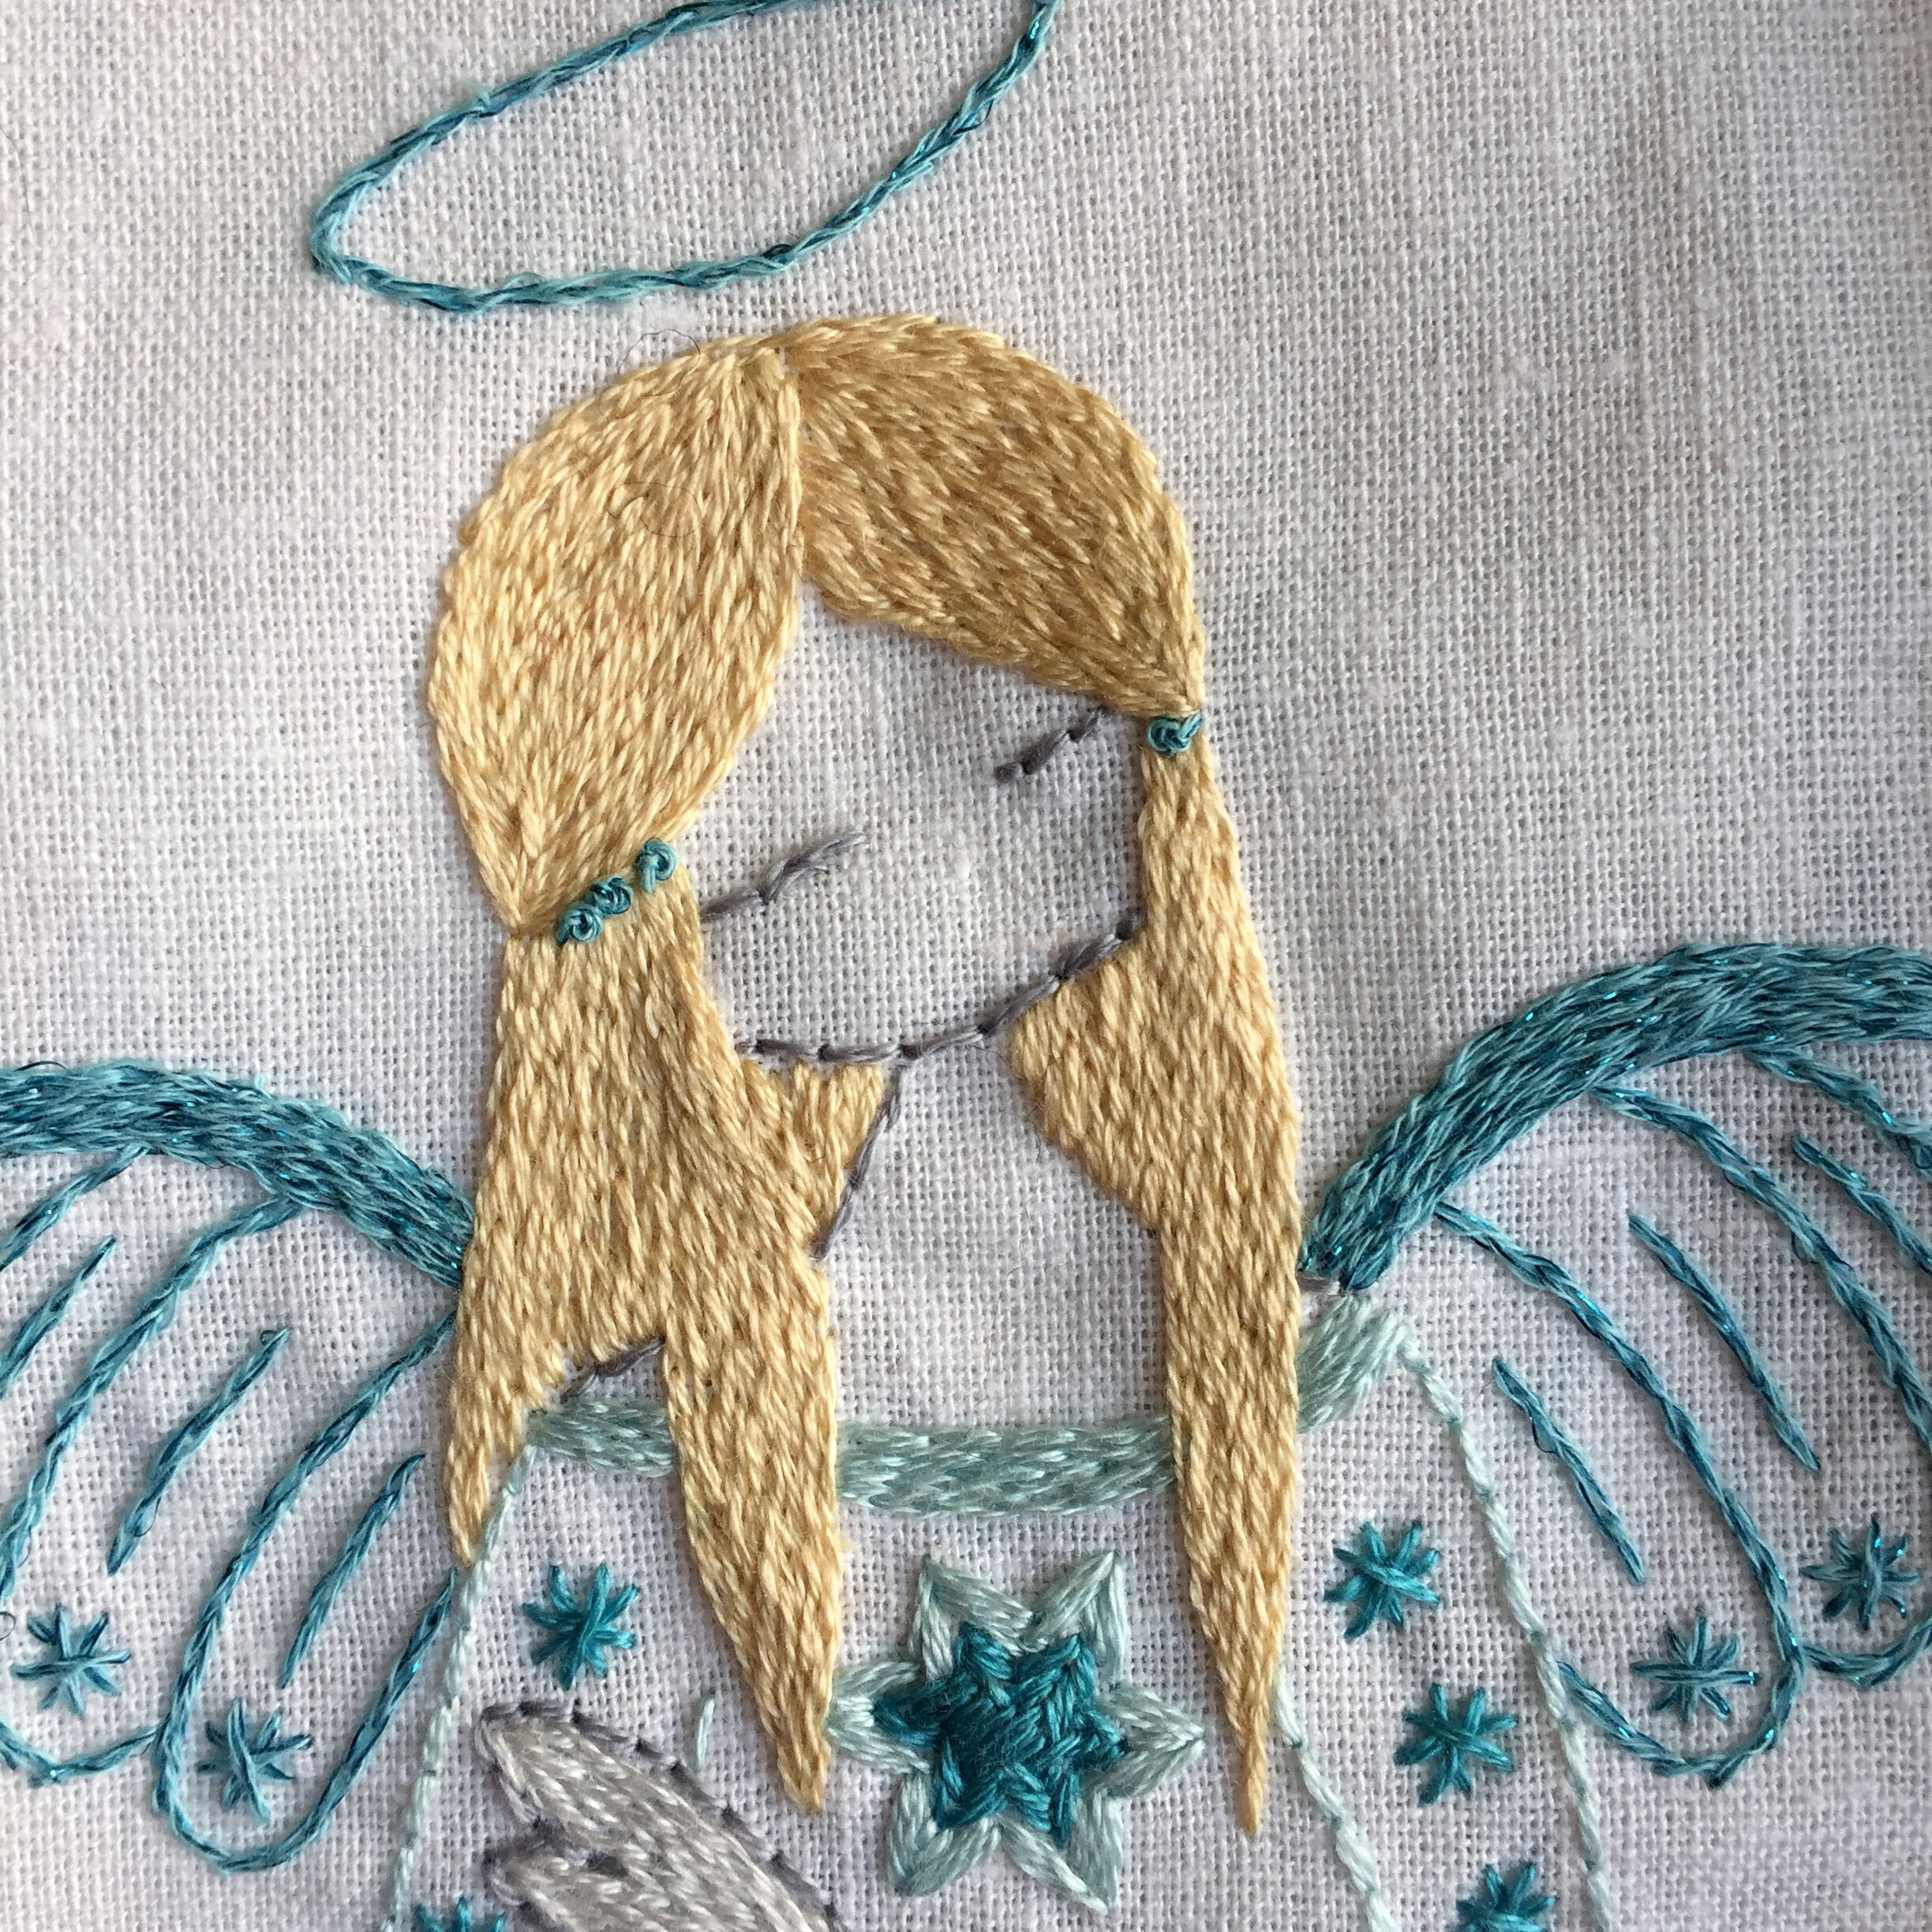 Christmas angel embroidery pattern and a quick how to make her into a